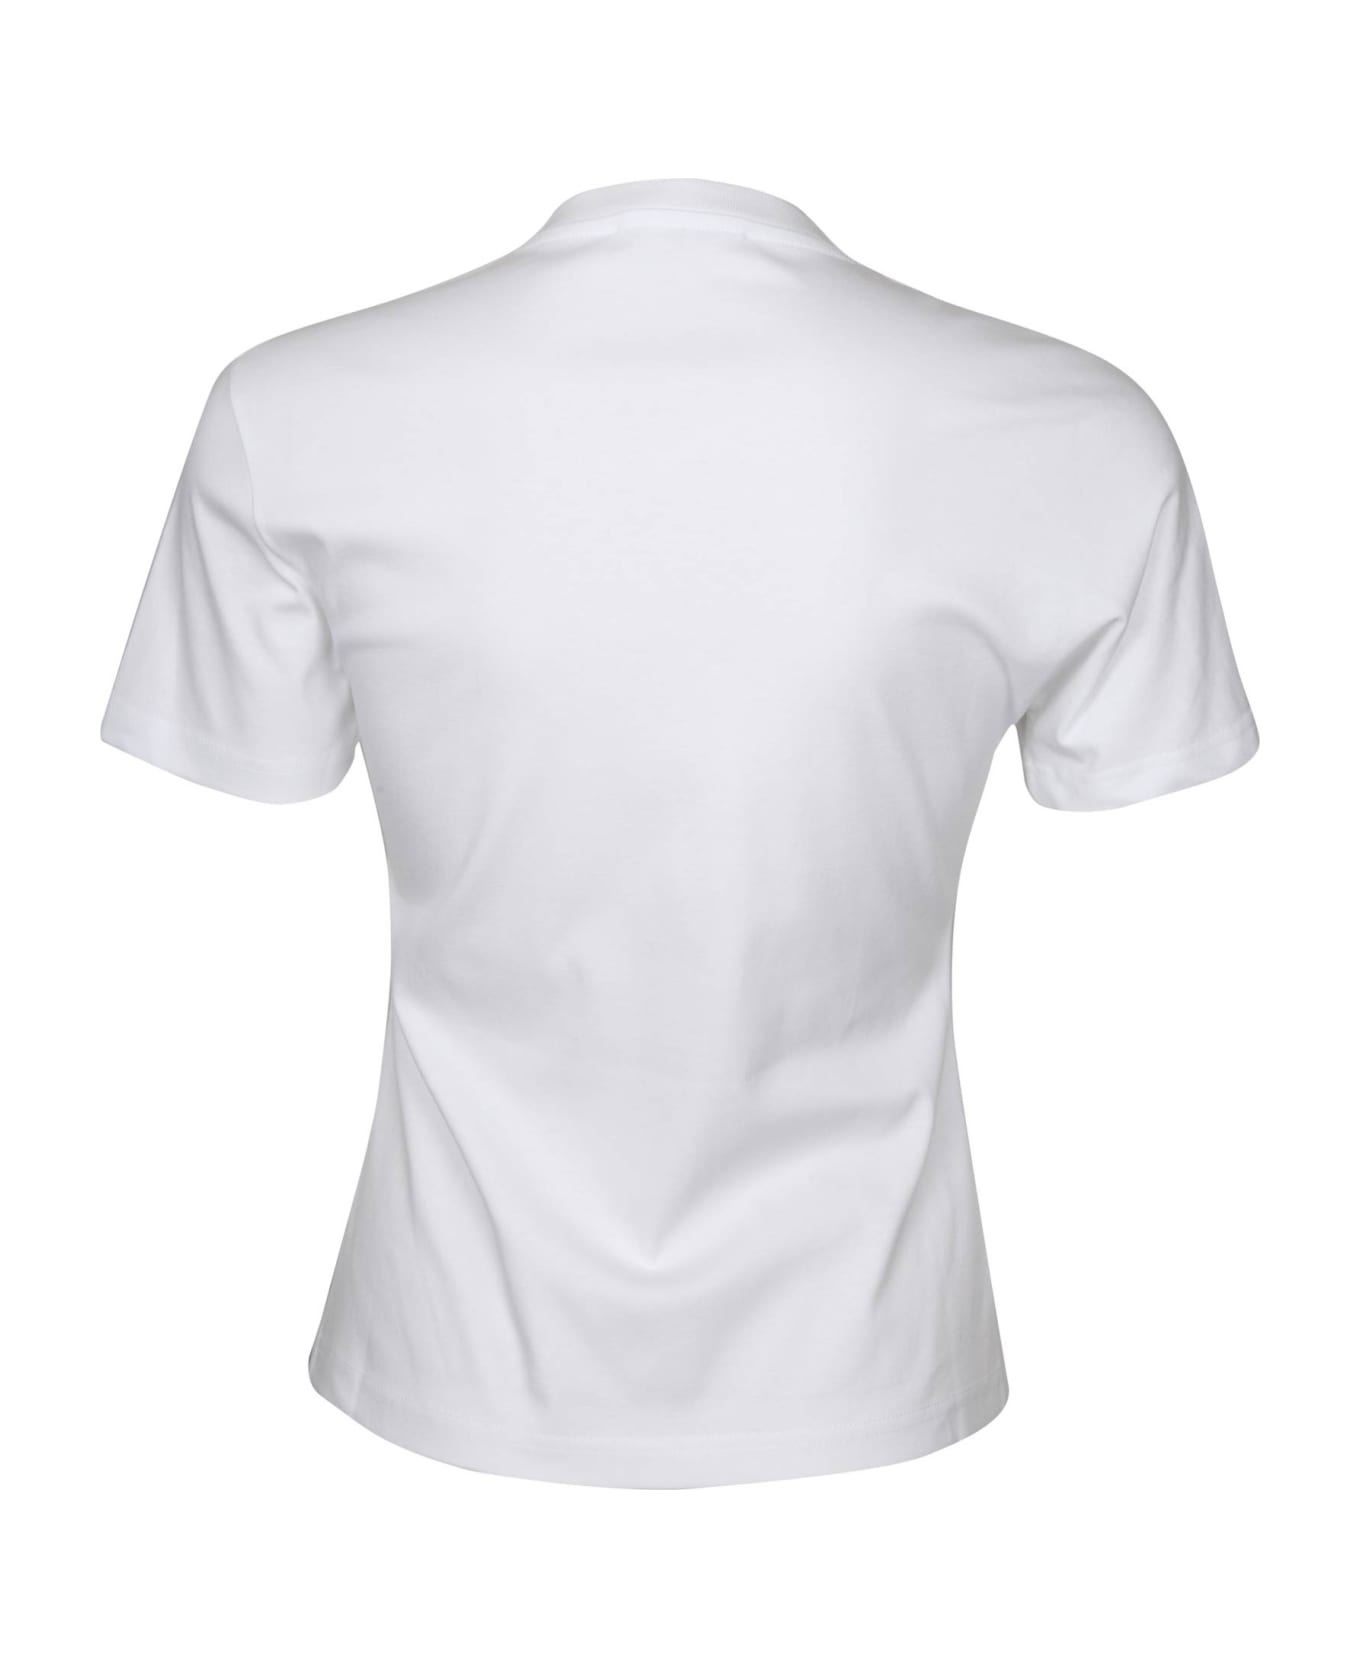 Lanvin Fitted Top In White Cotton - Optic White